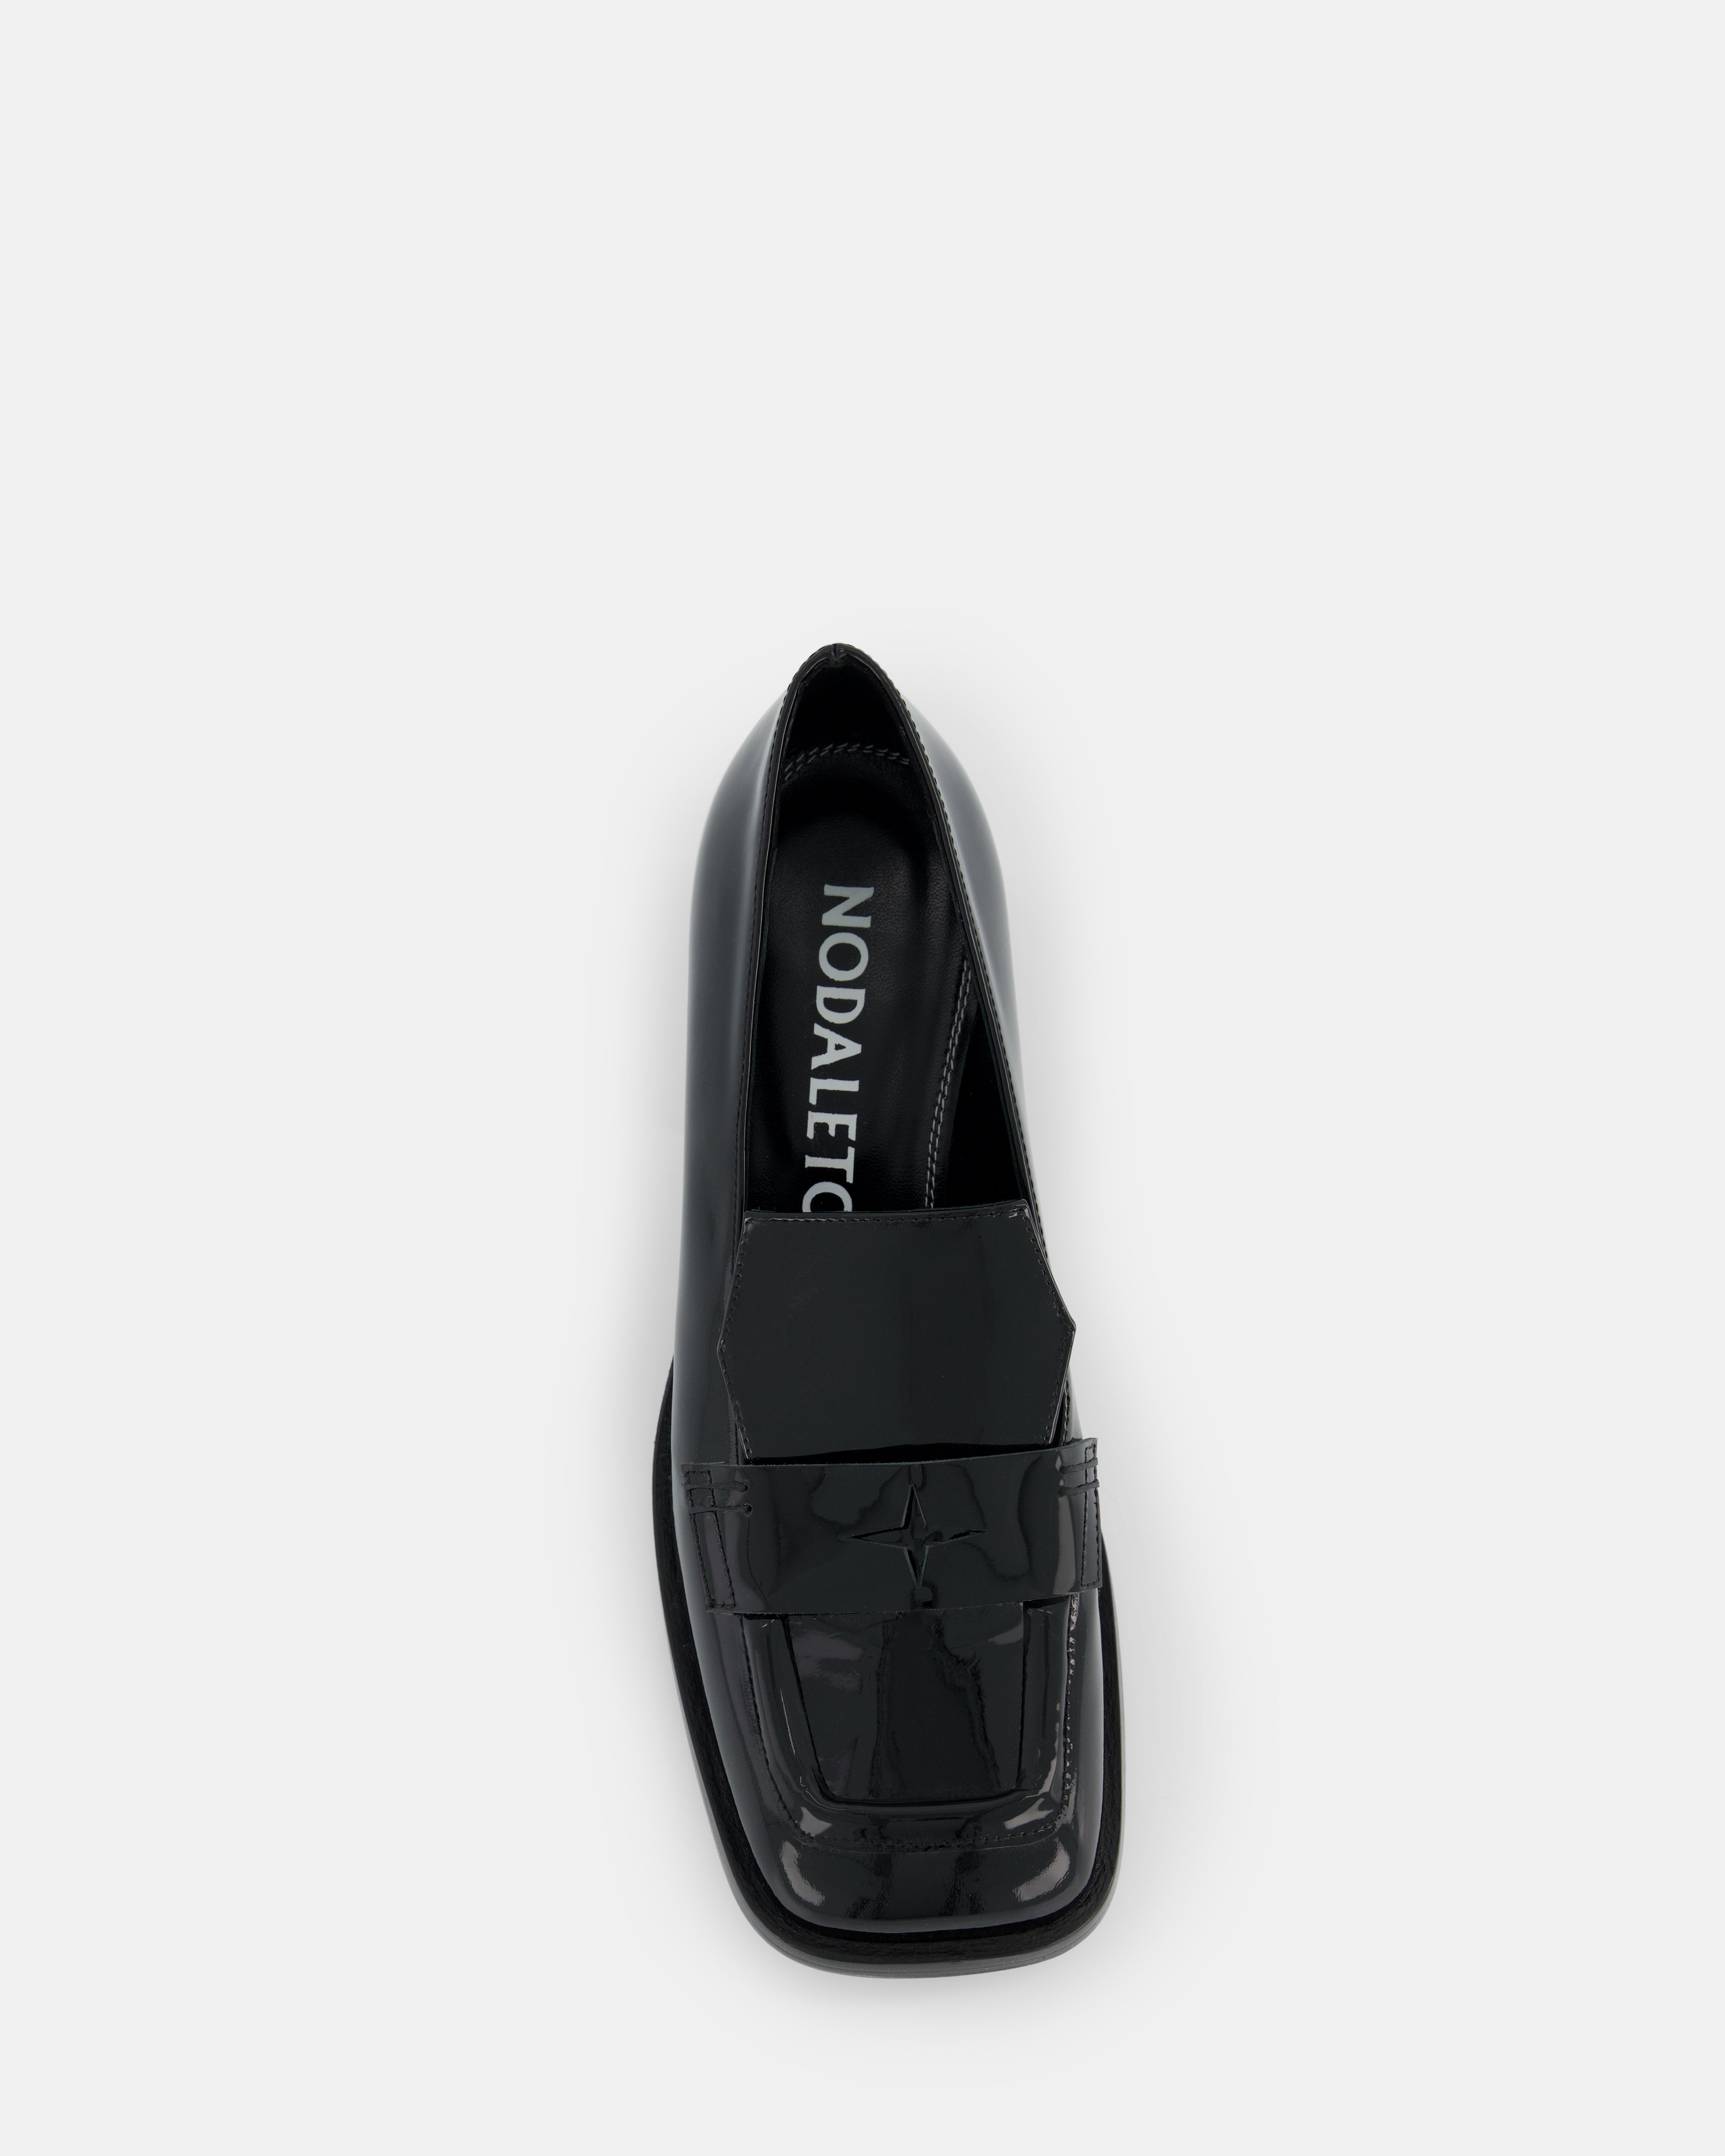 Nodaleto Bulla Cara patent leather loafer pumps - ShopStyle